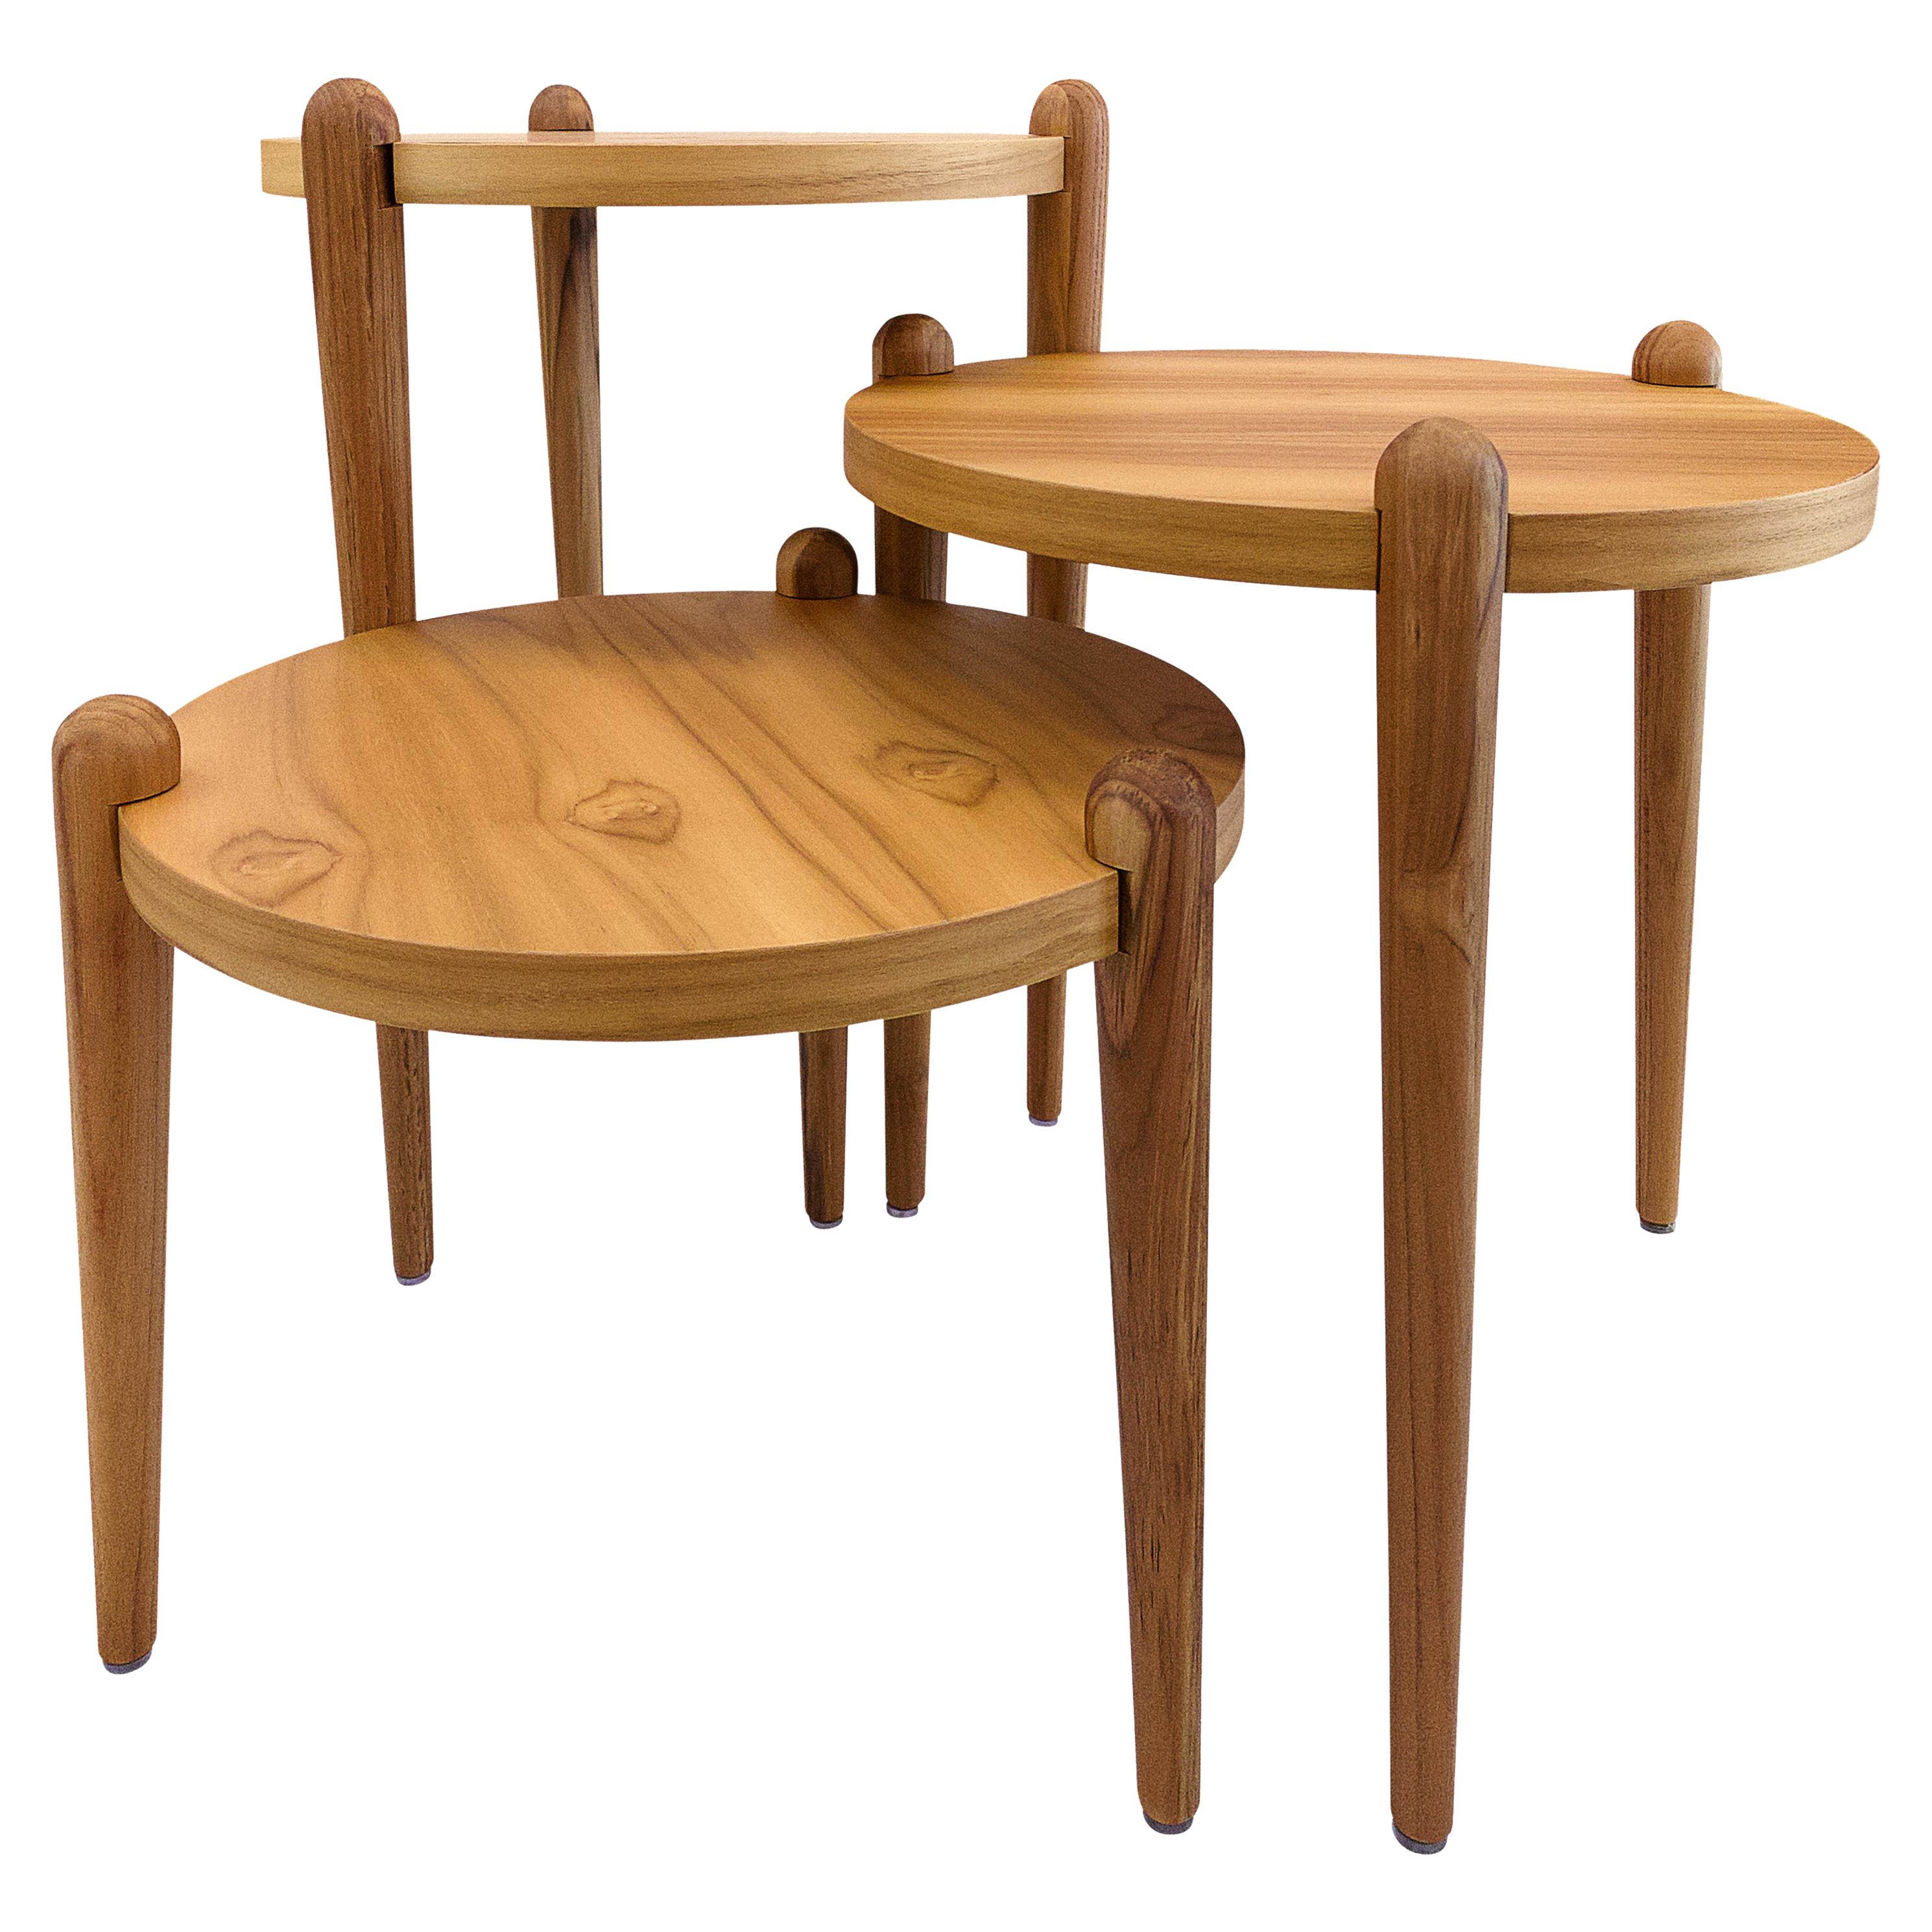 Pan Contemporary Side Tables in Teak Wood, Set of 3